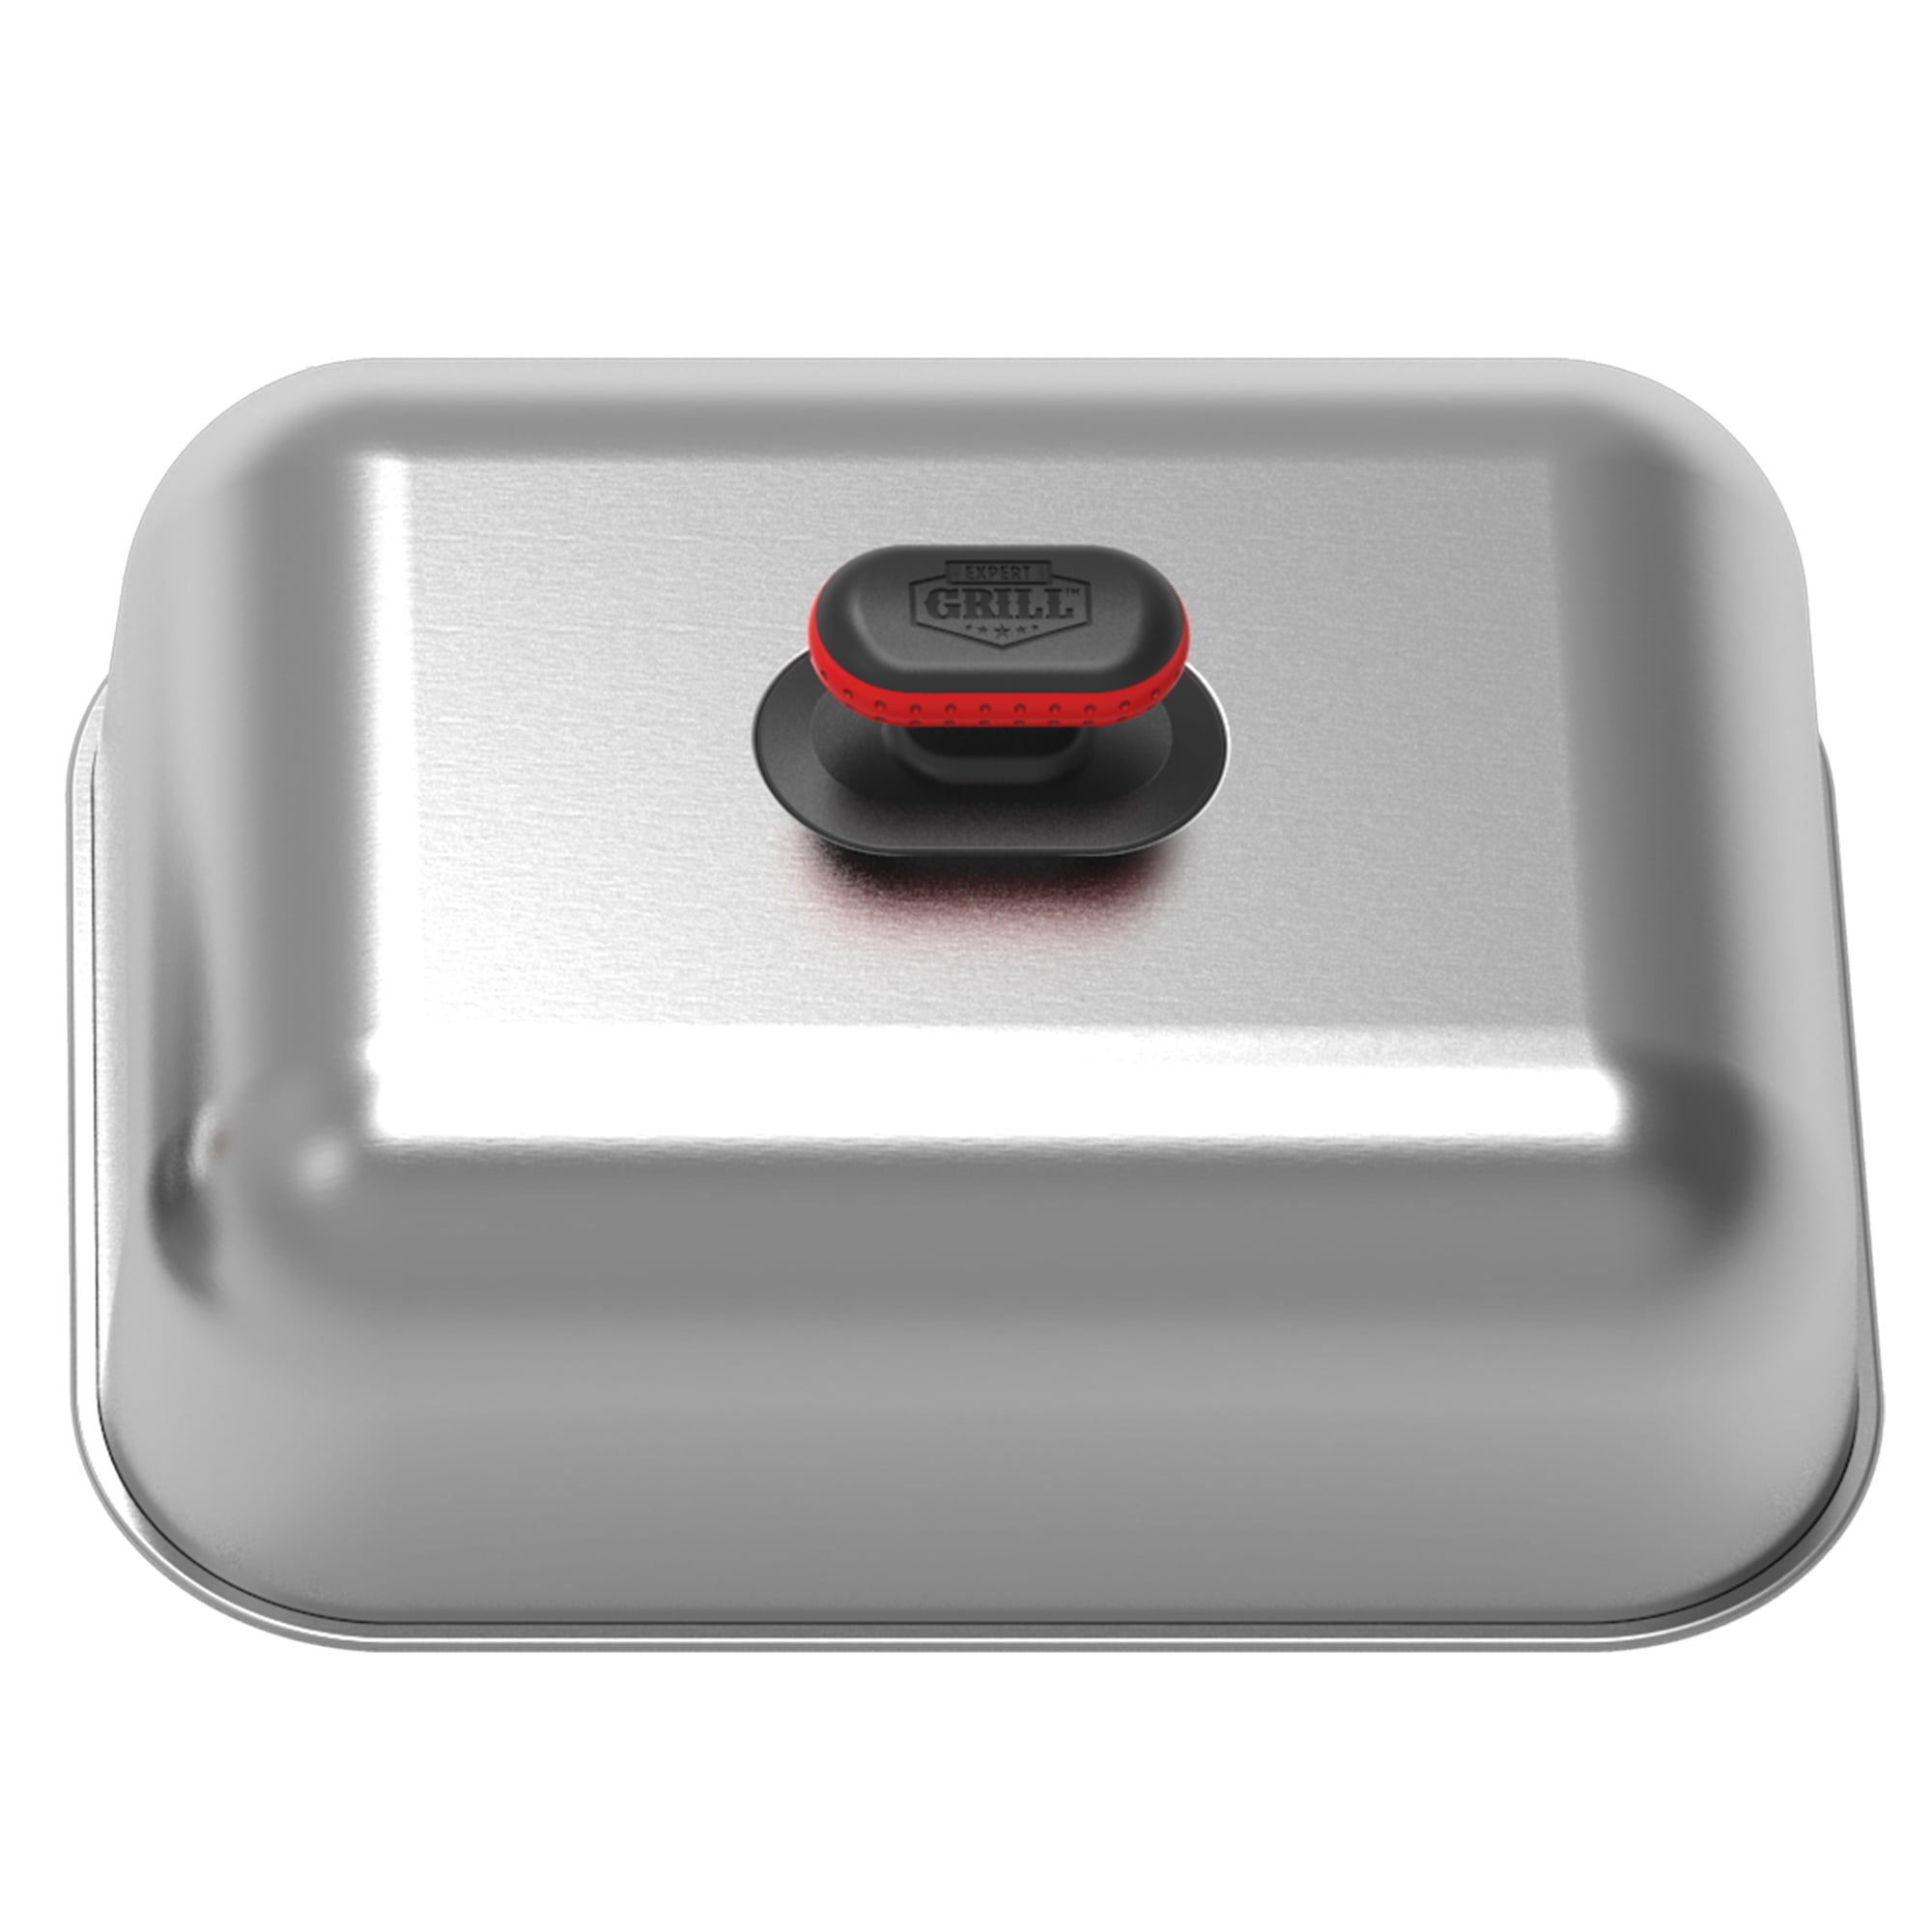 Expert Grill Stainless Steel Griddle Dome, 12"x 9.25"